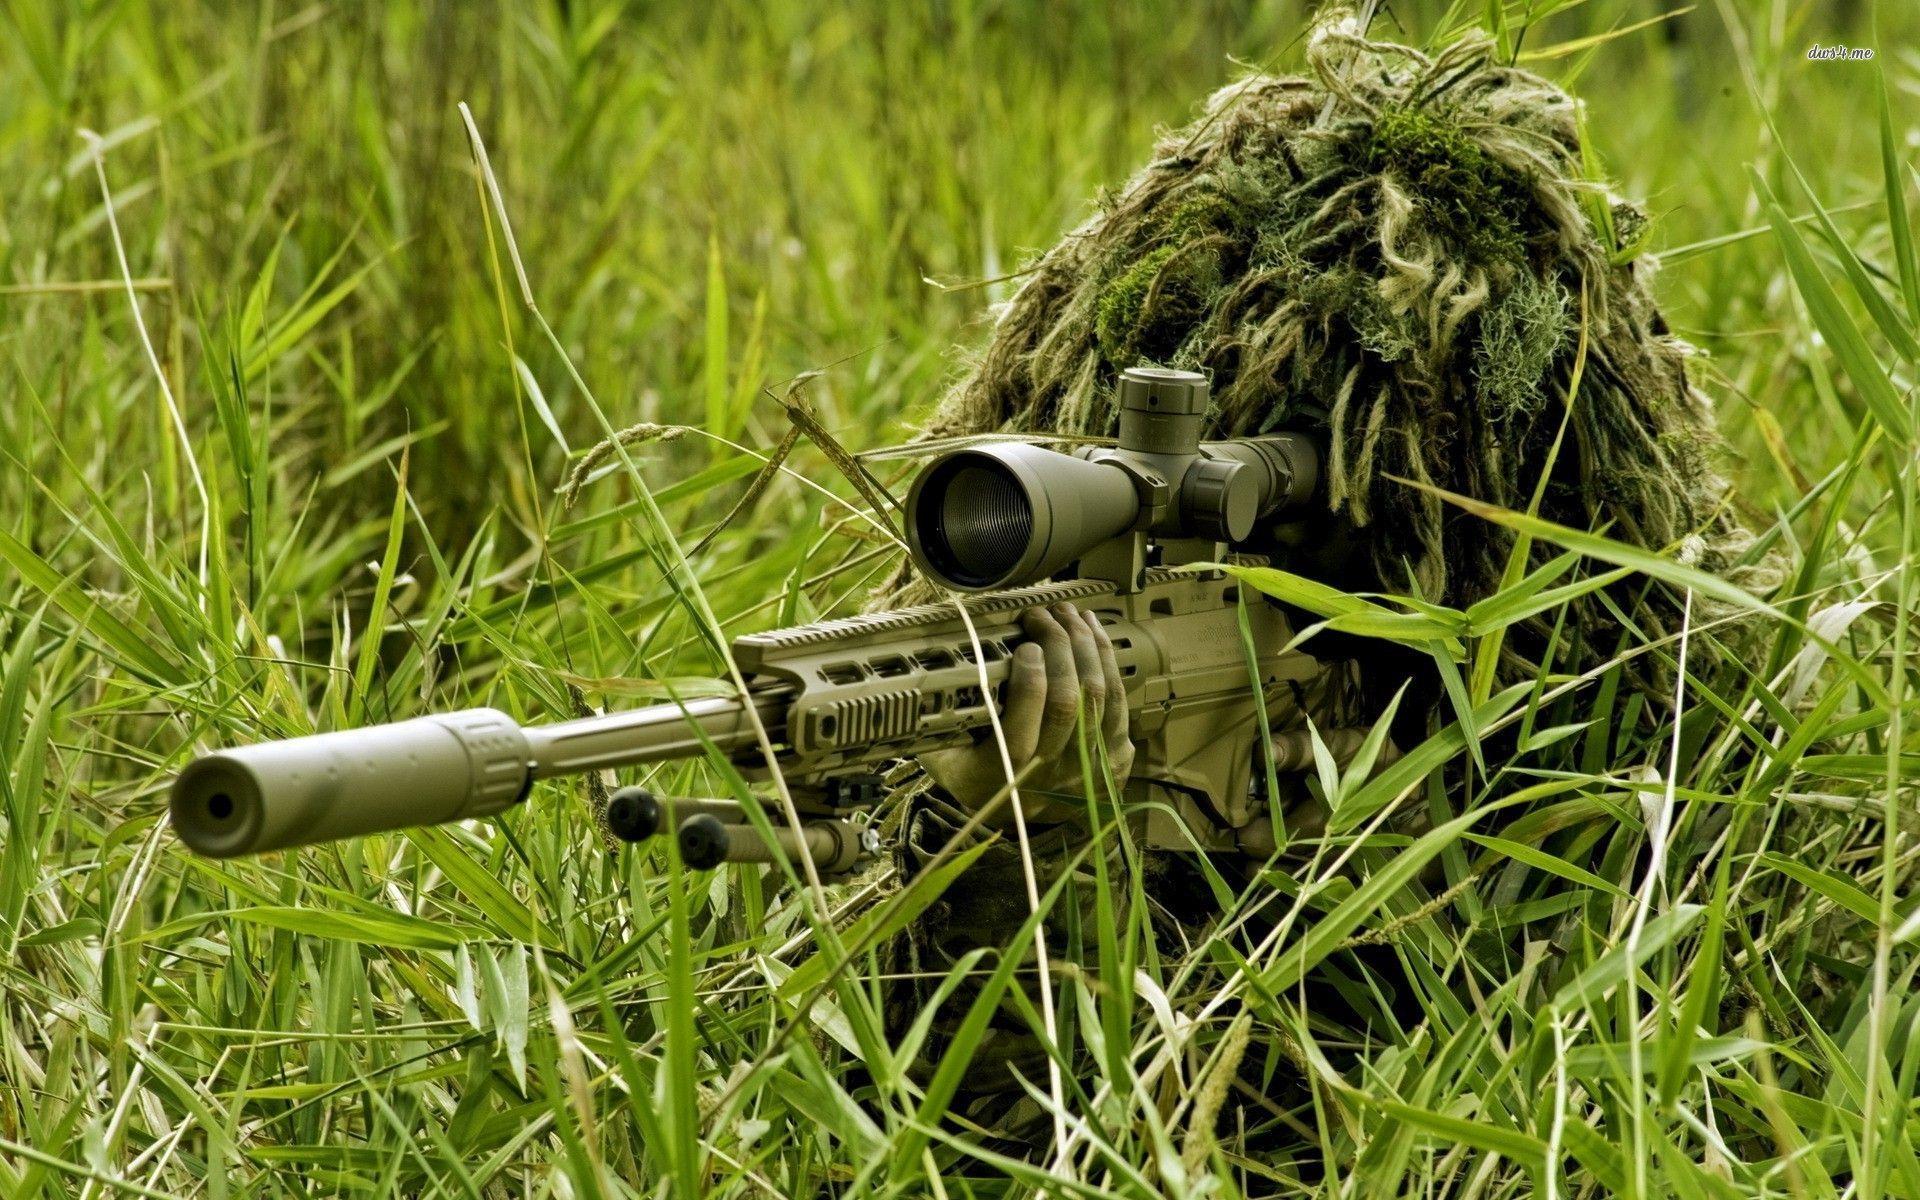 Snipers HD Wallpaper. Forces Tactical